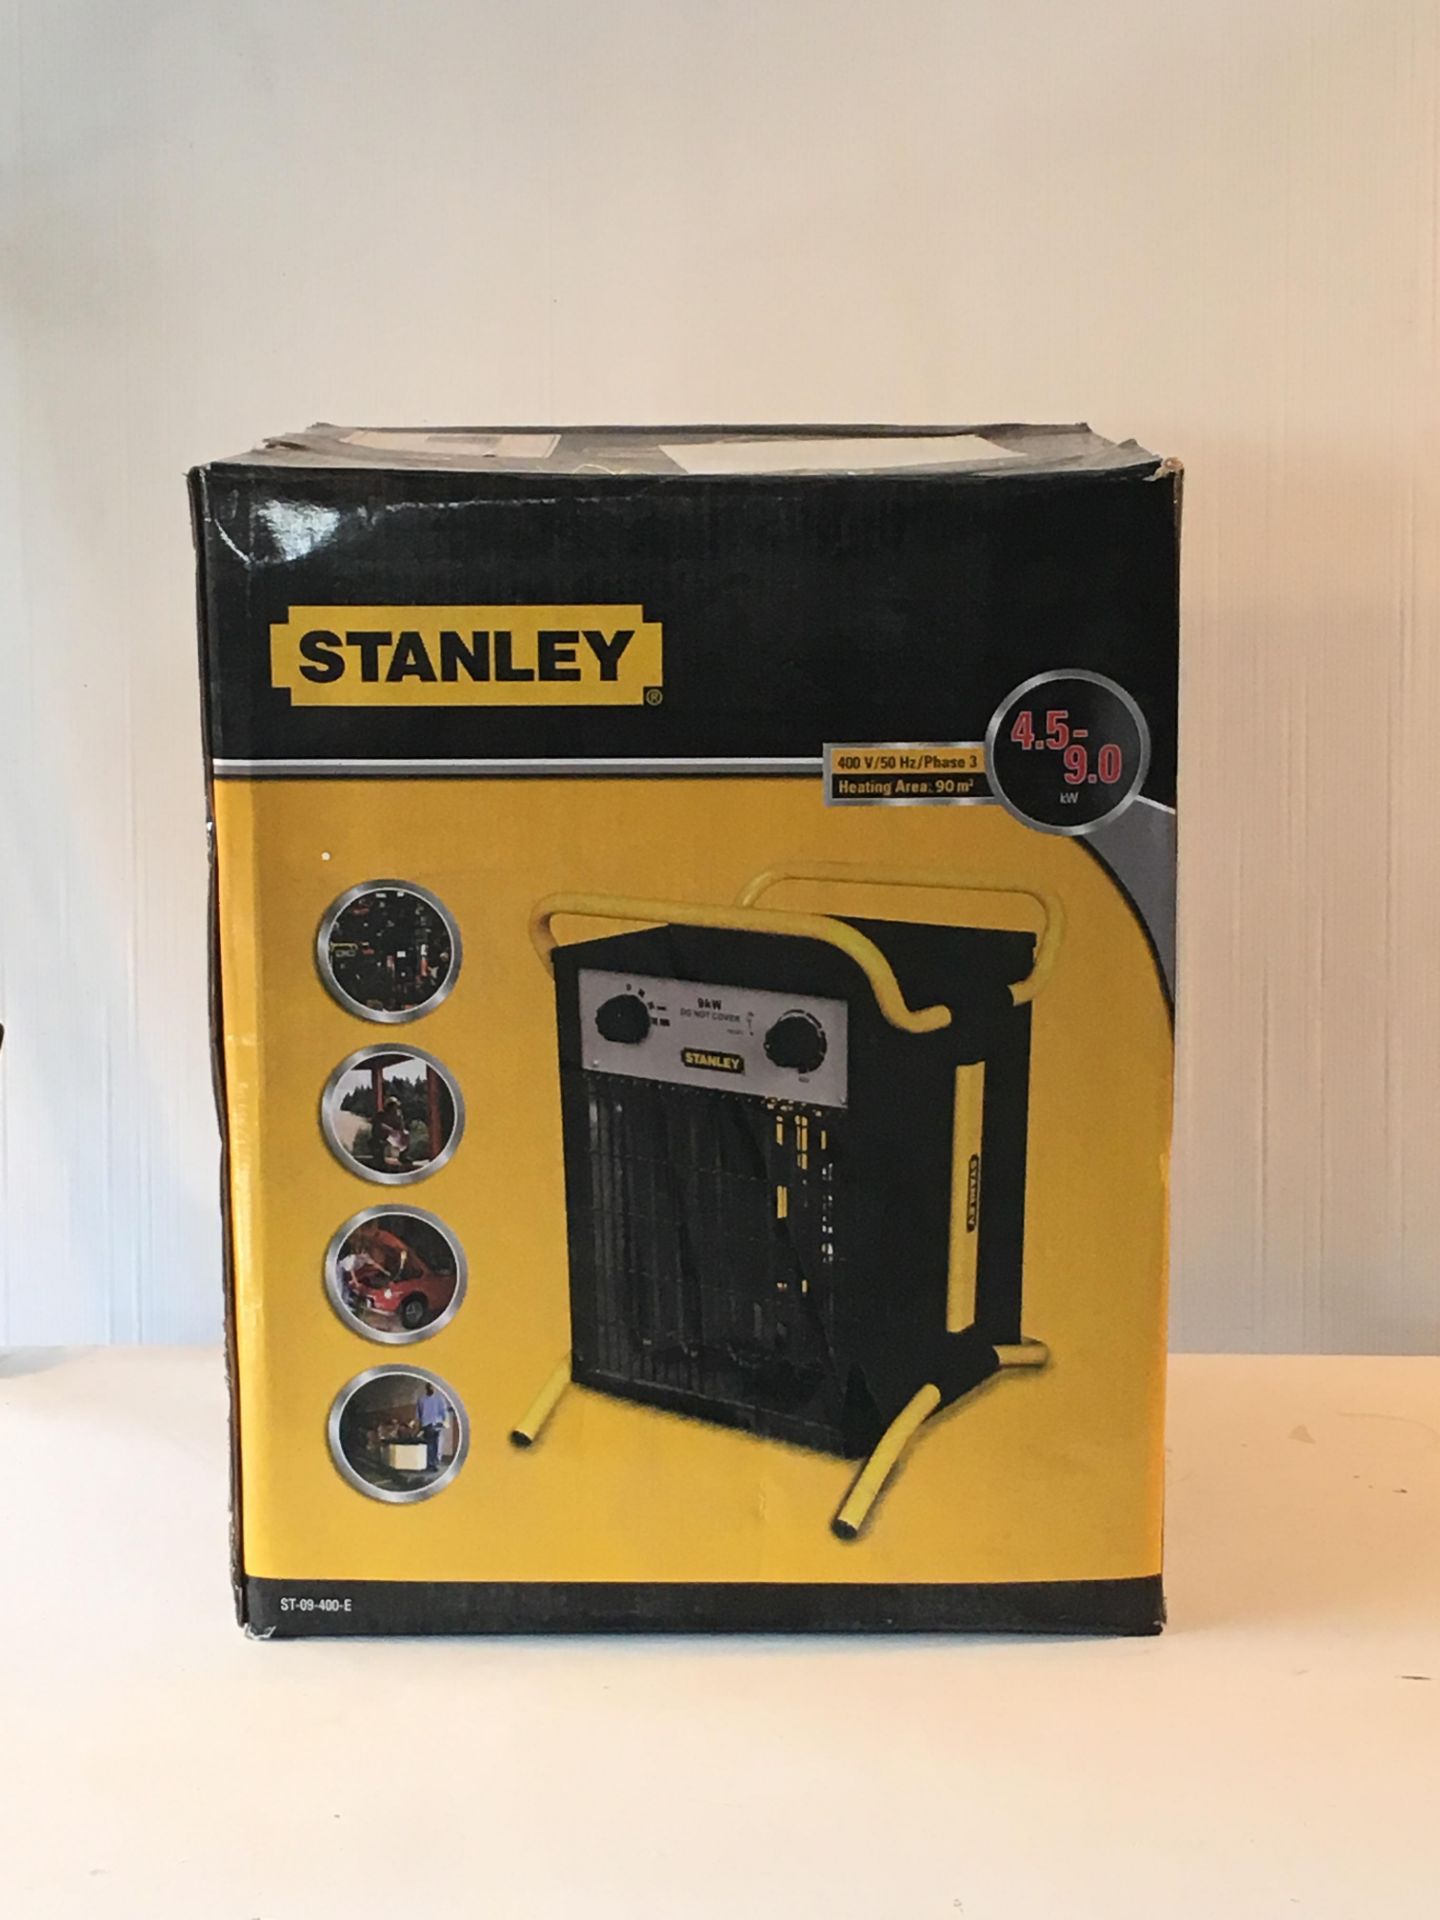 New Stanley ST-09-400-E 55/4500/9000W 3 Phase Electric Fan Heater - Image 5 of 8